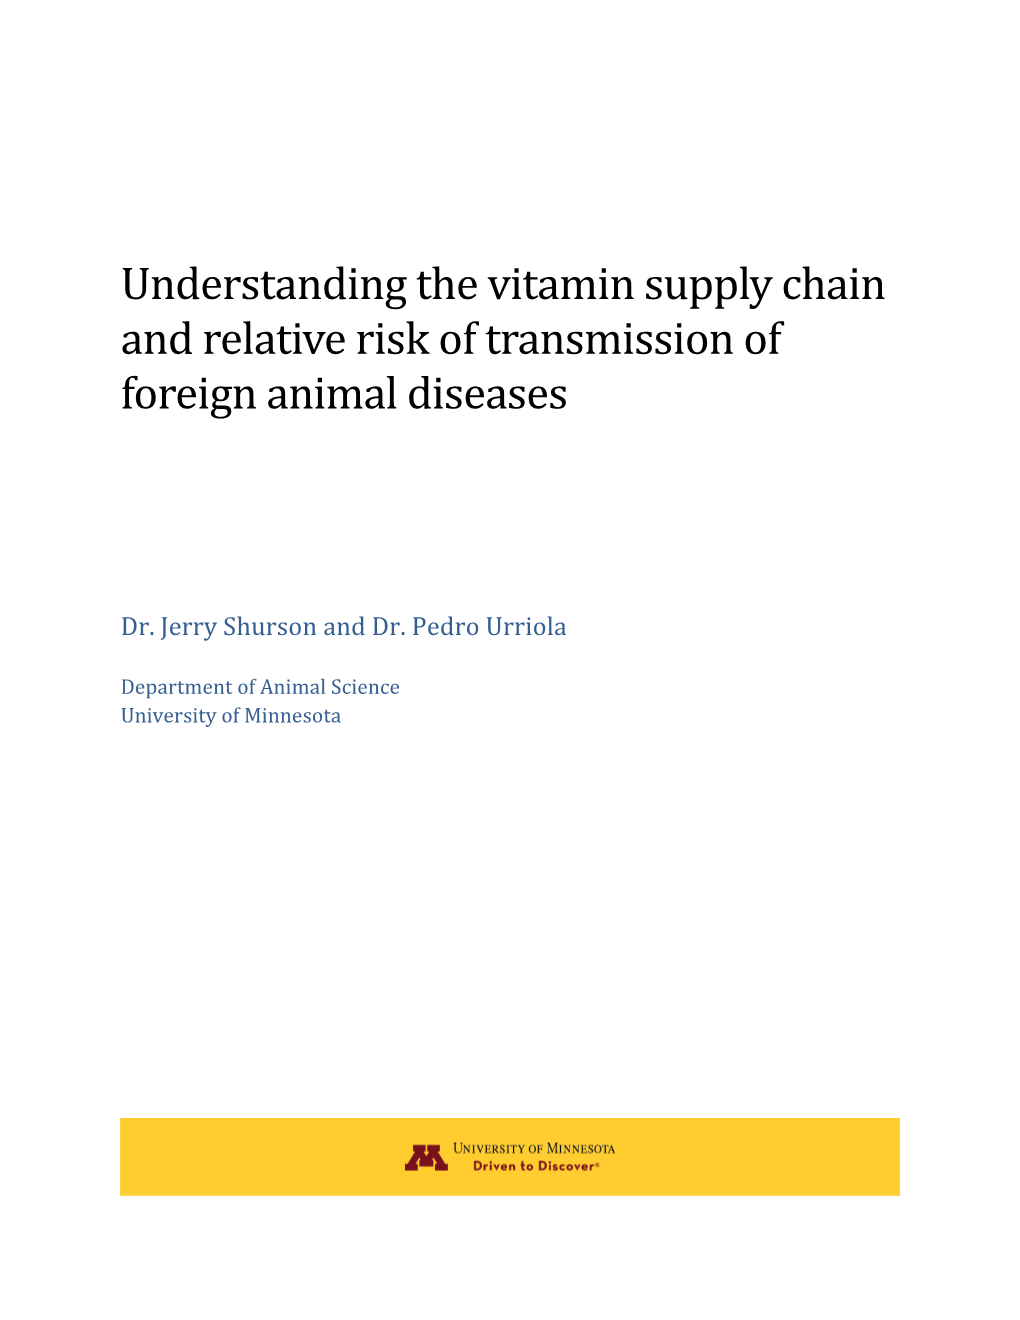 Understanding the Vitamin Supply Chain and Relative Risk of Transmission of Foreign Animal Diseases